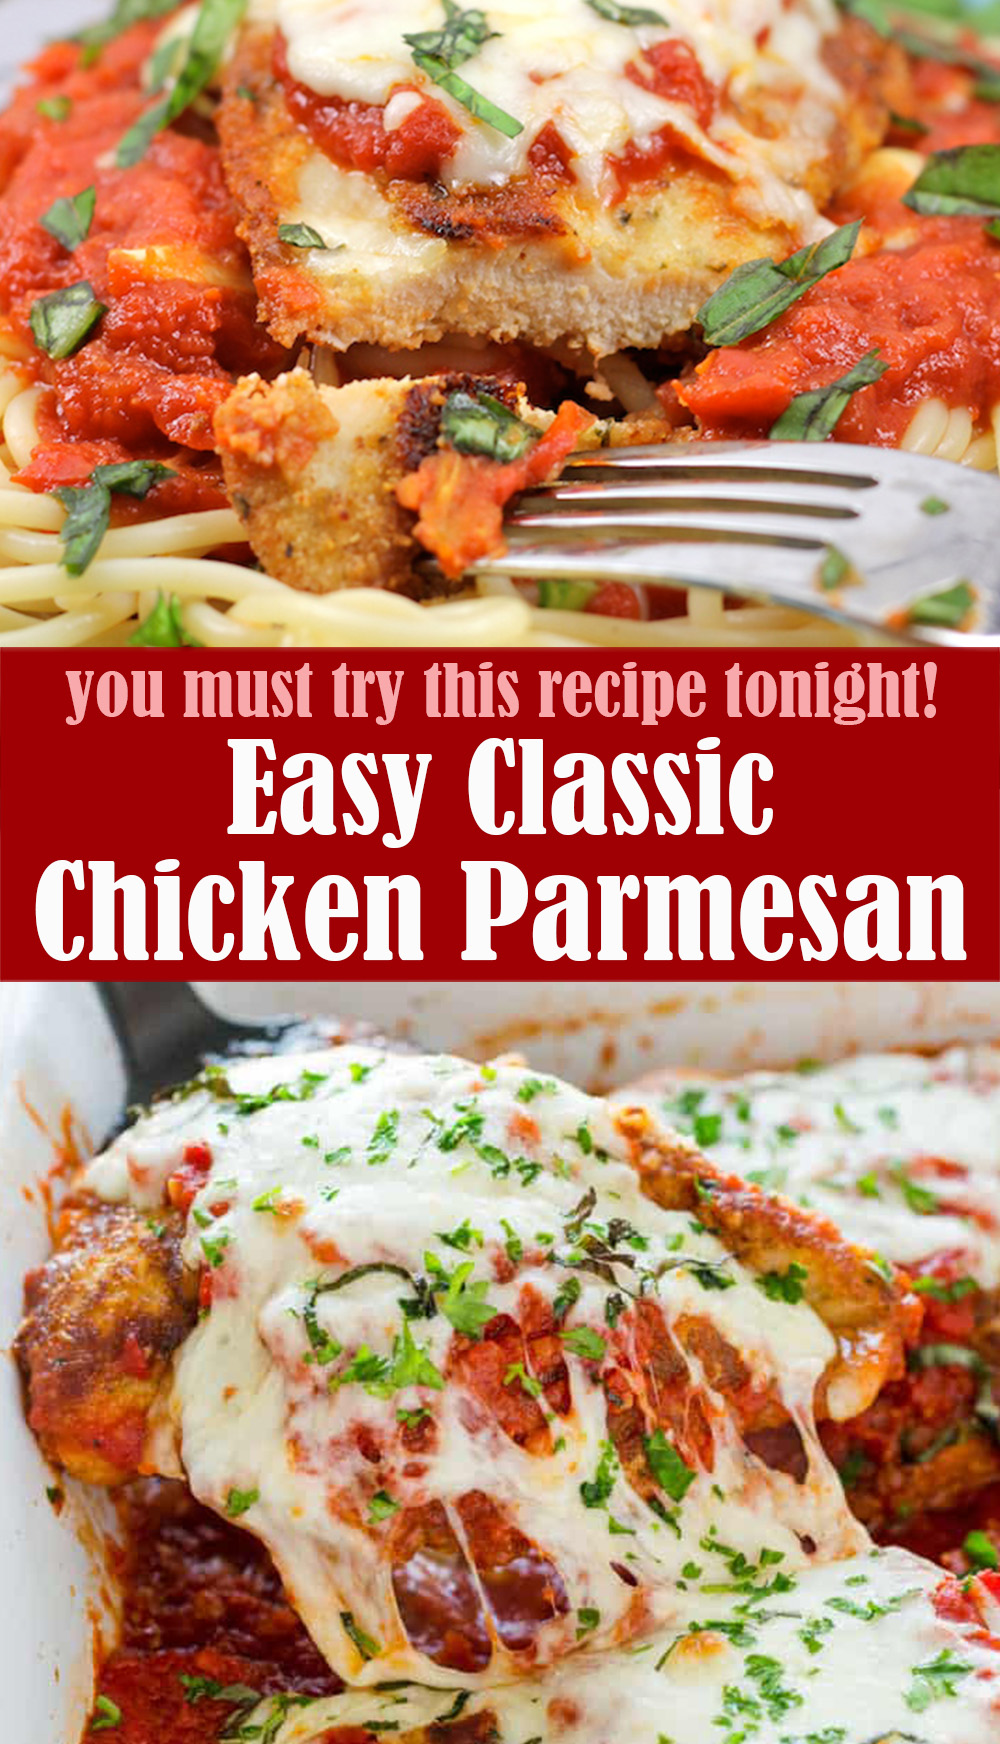 Quick and Easy Classic Chicken Parmesan